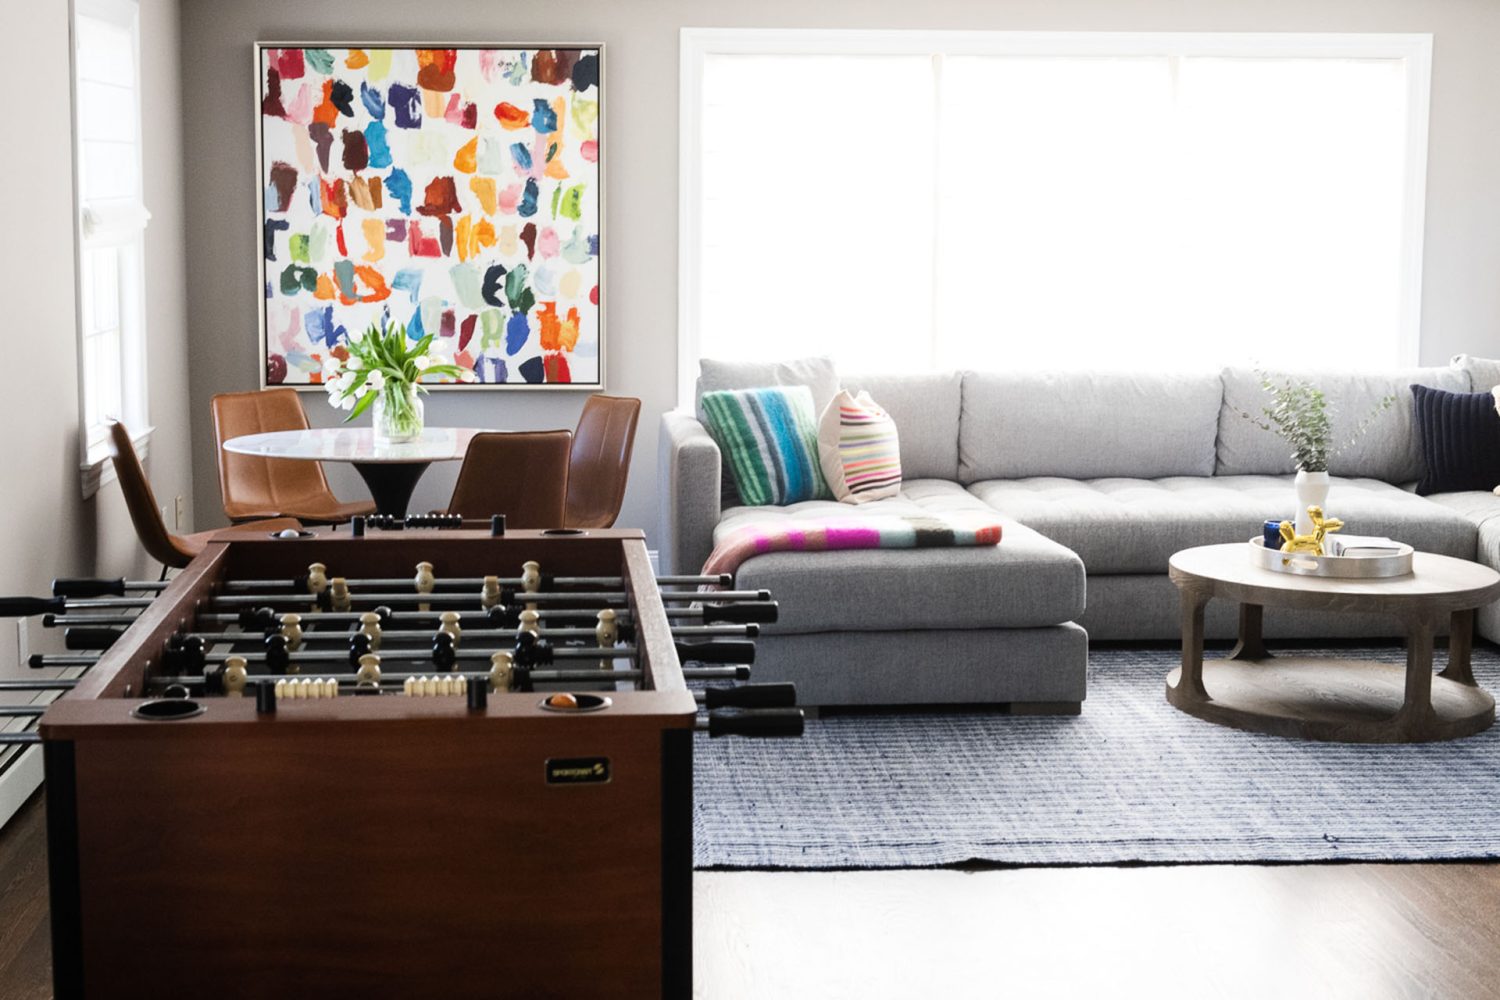 A large, square abstract painting of rainbow-colored brushstrokes above a white game table with leather chairs and aside a light gray sectional couch. There is a medium wood foosball table in the foreground.